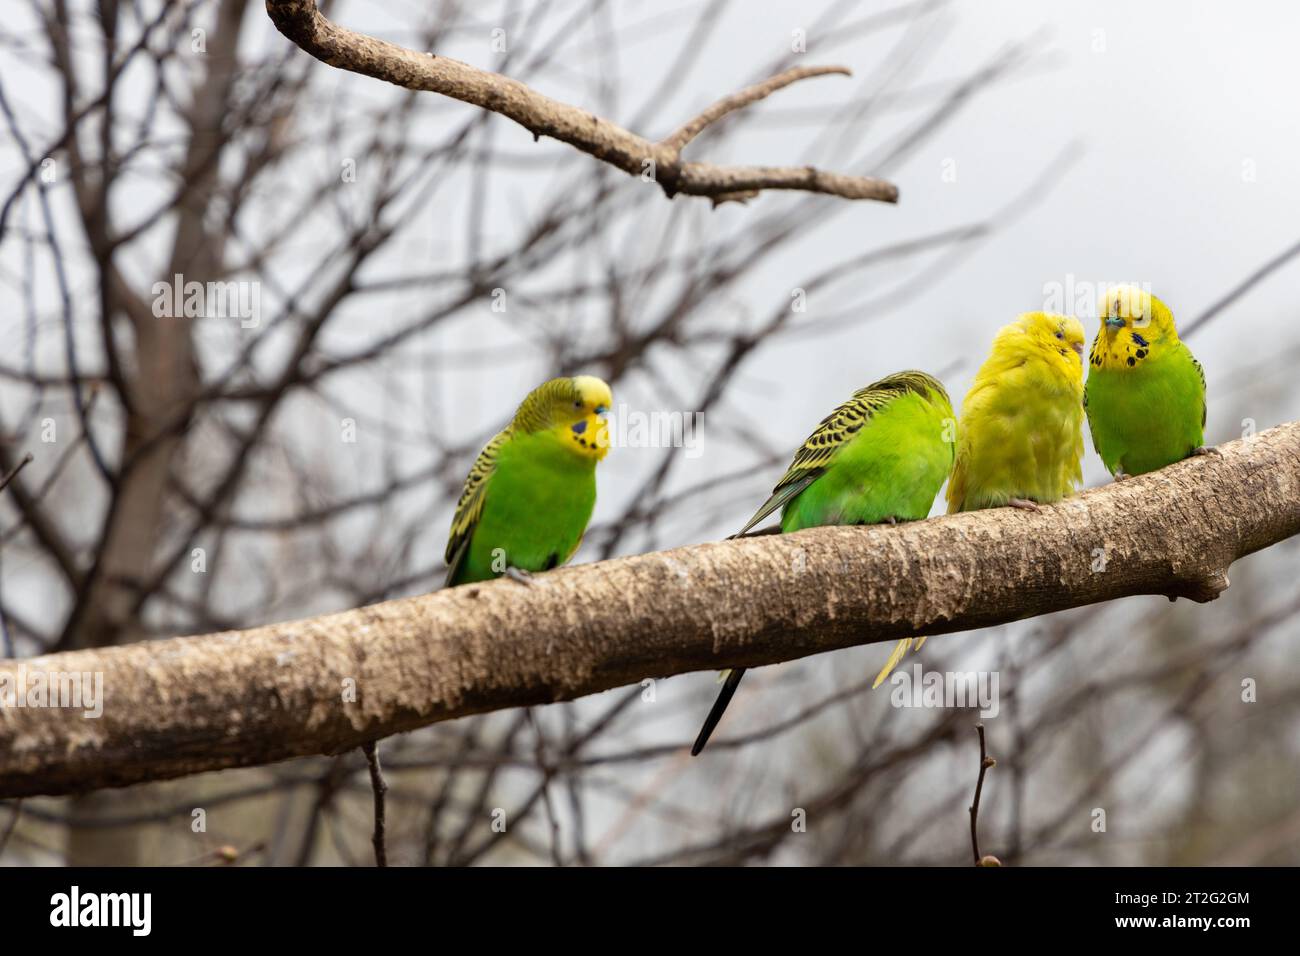 Budgies eat and cuddle in a small animal park Stock Photo